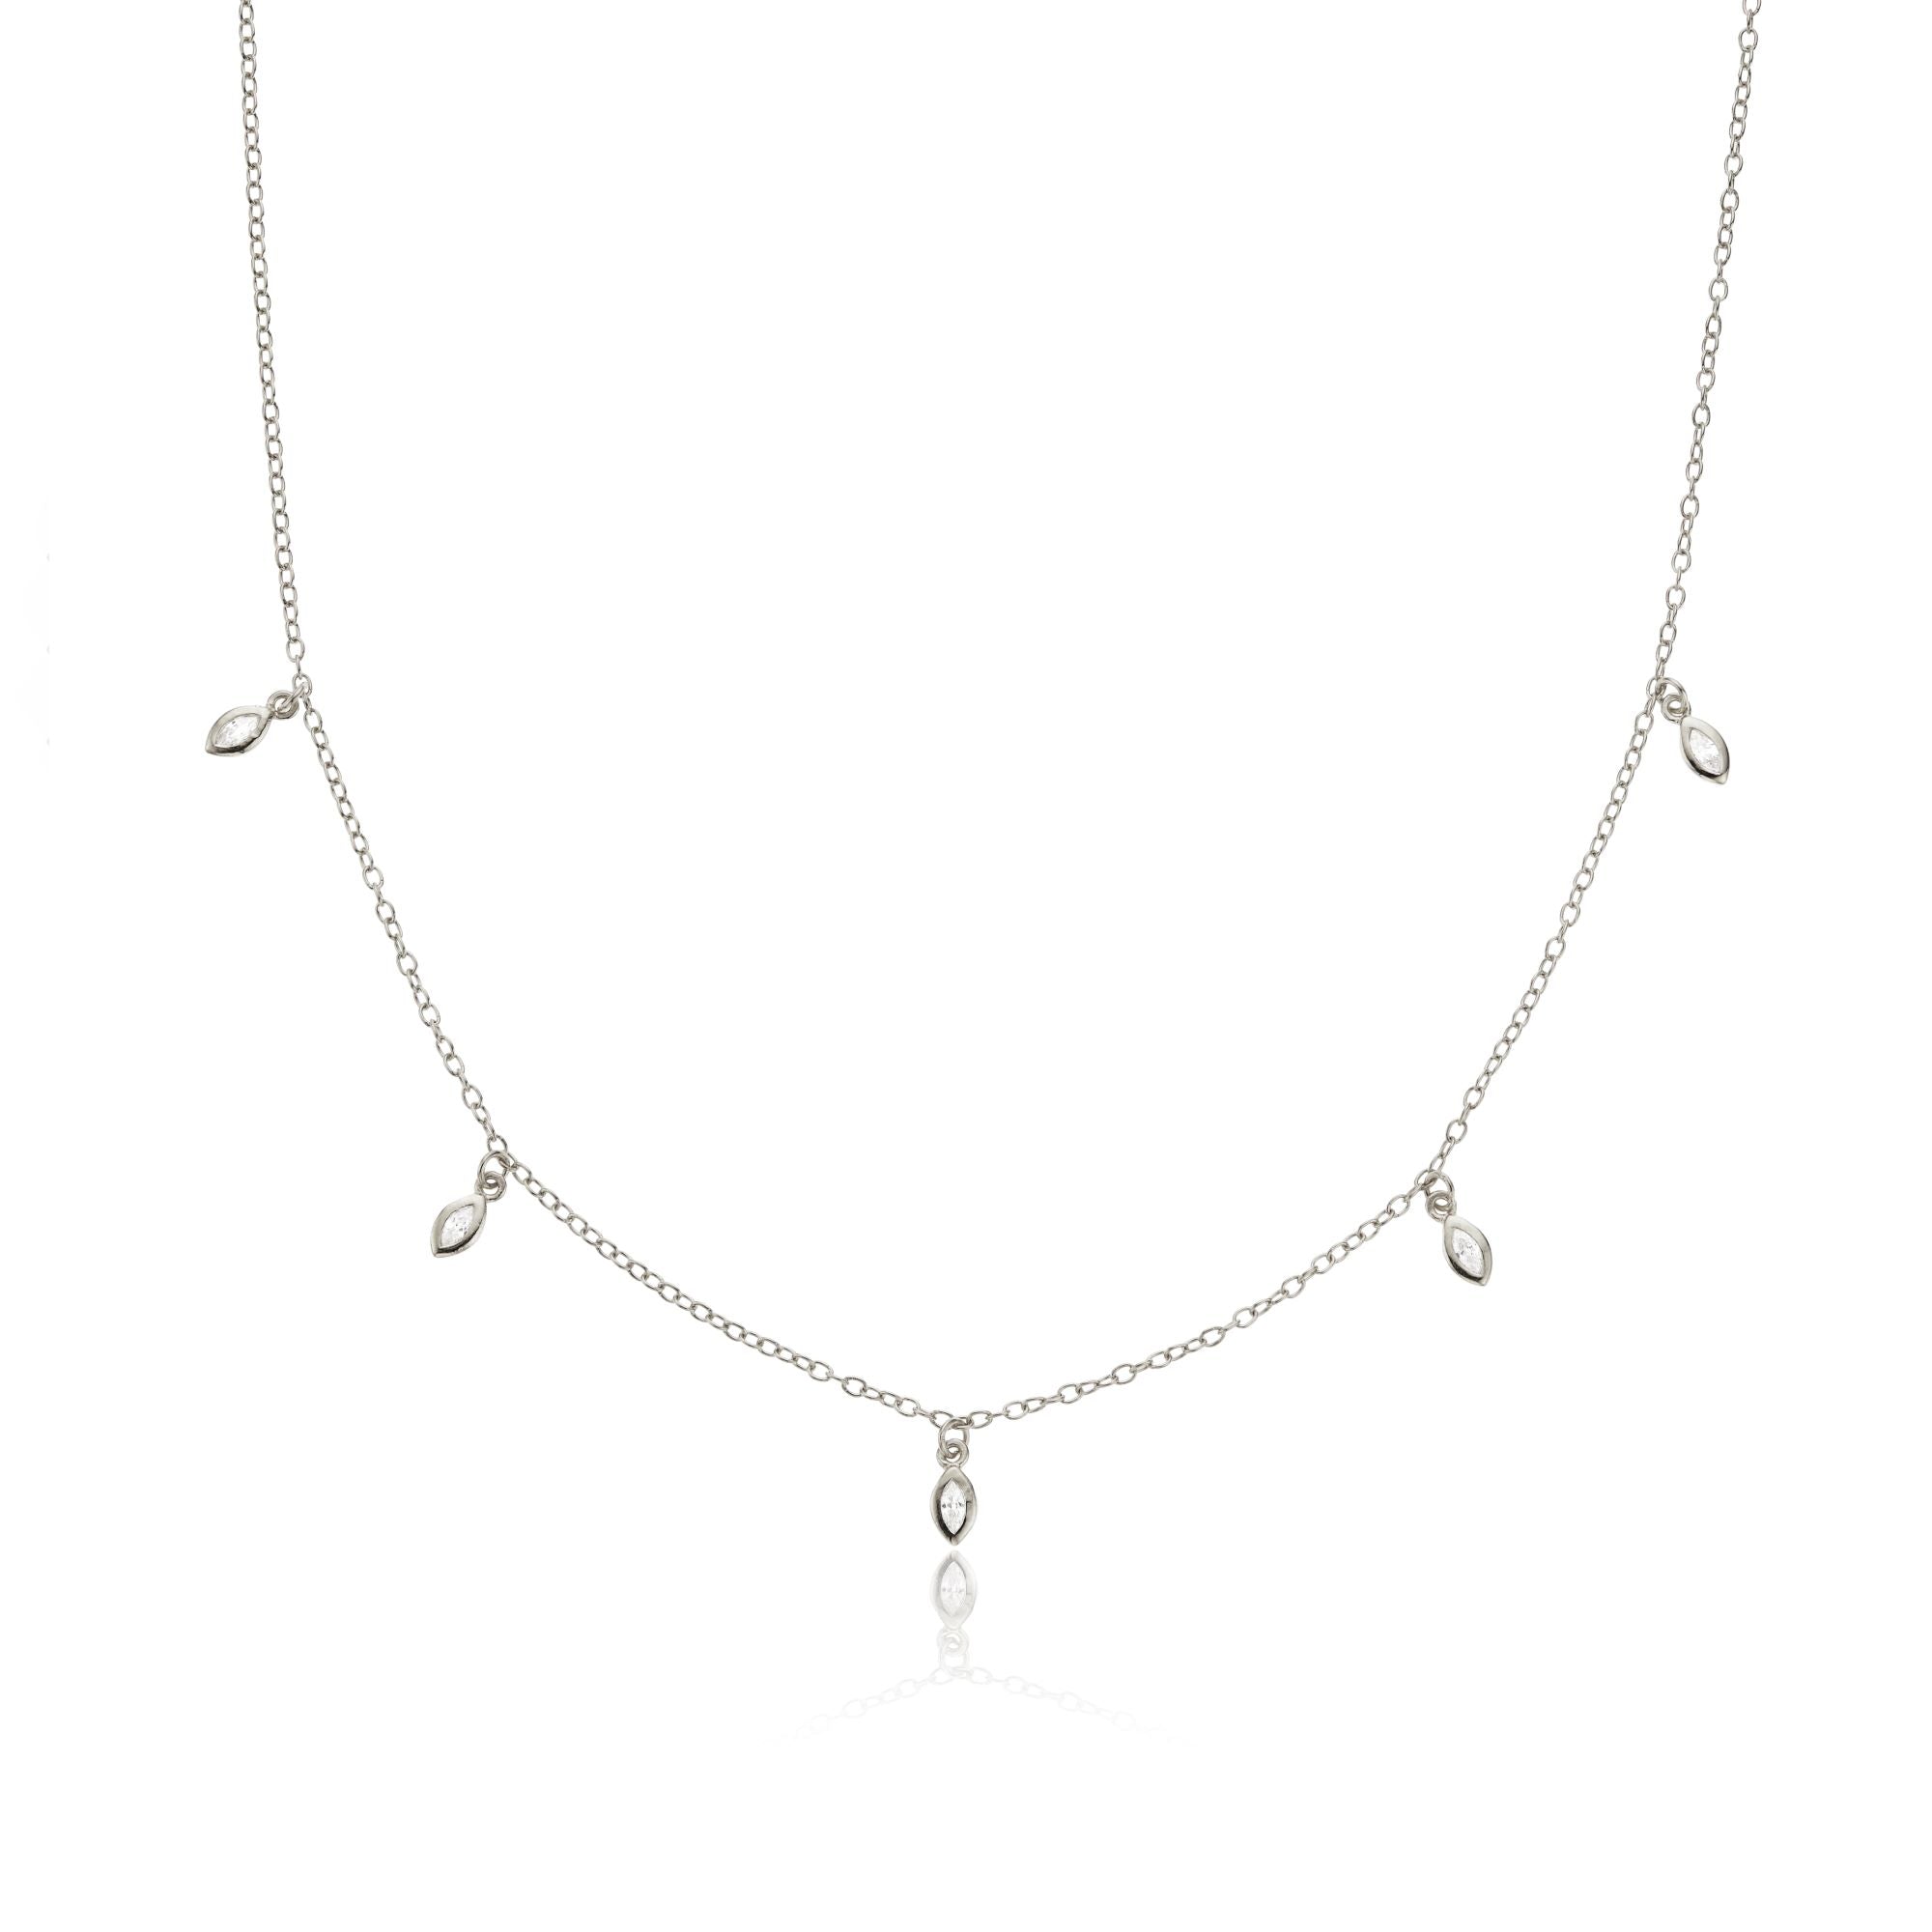 Silver diamond style marquise drop necklace on a white background